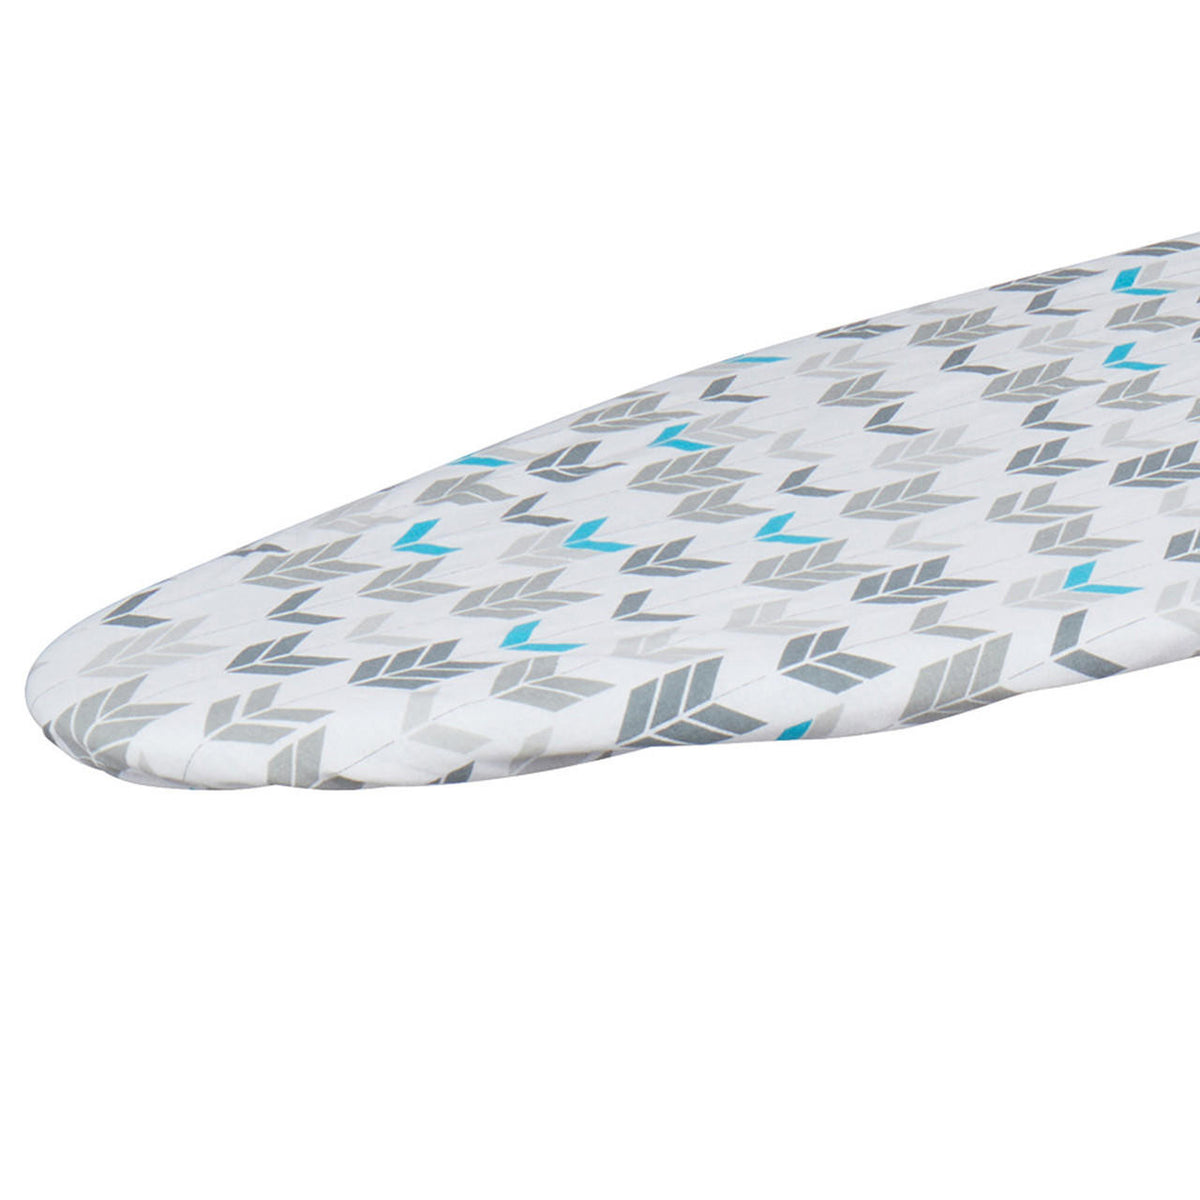 Beldray 137 x 38cm Adjustable Iron Rest Ironing Board - Grey/Turquoise | LA024398AREWU7 from Beldray - DID Electrical